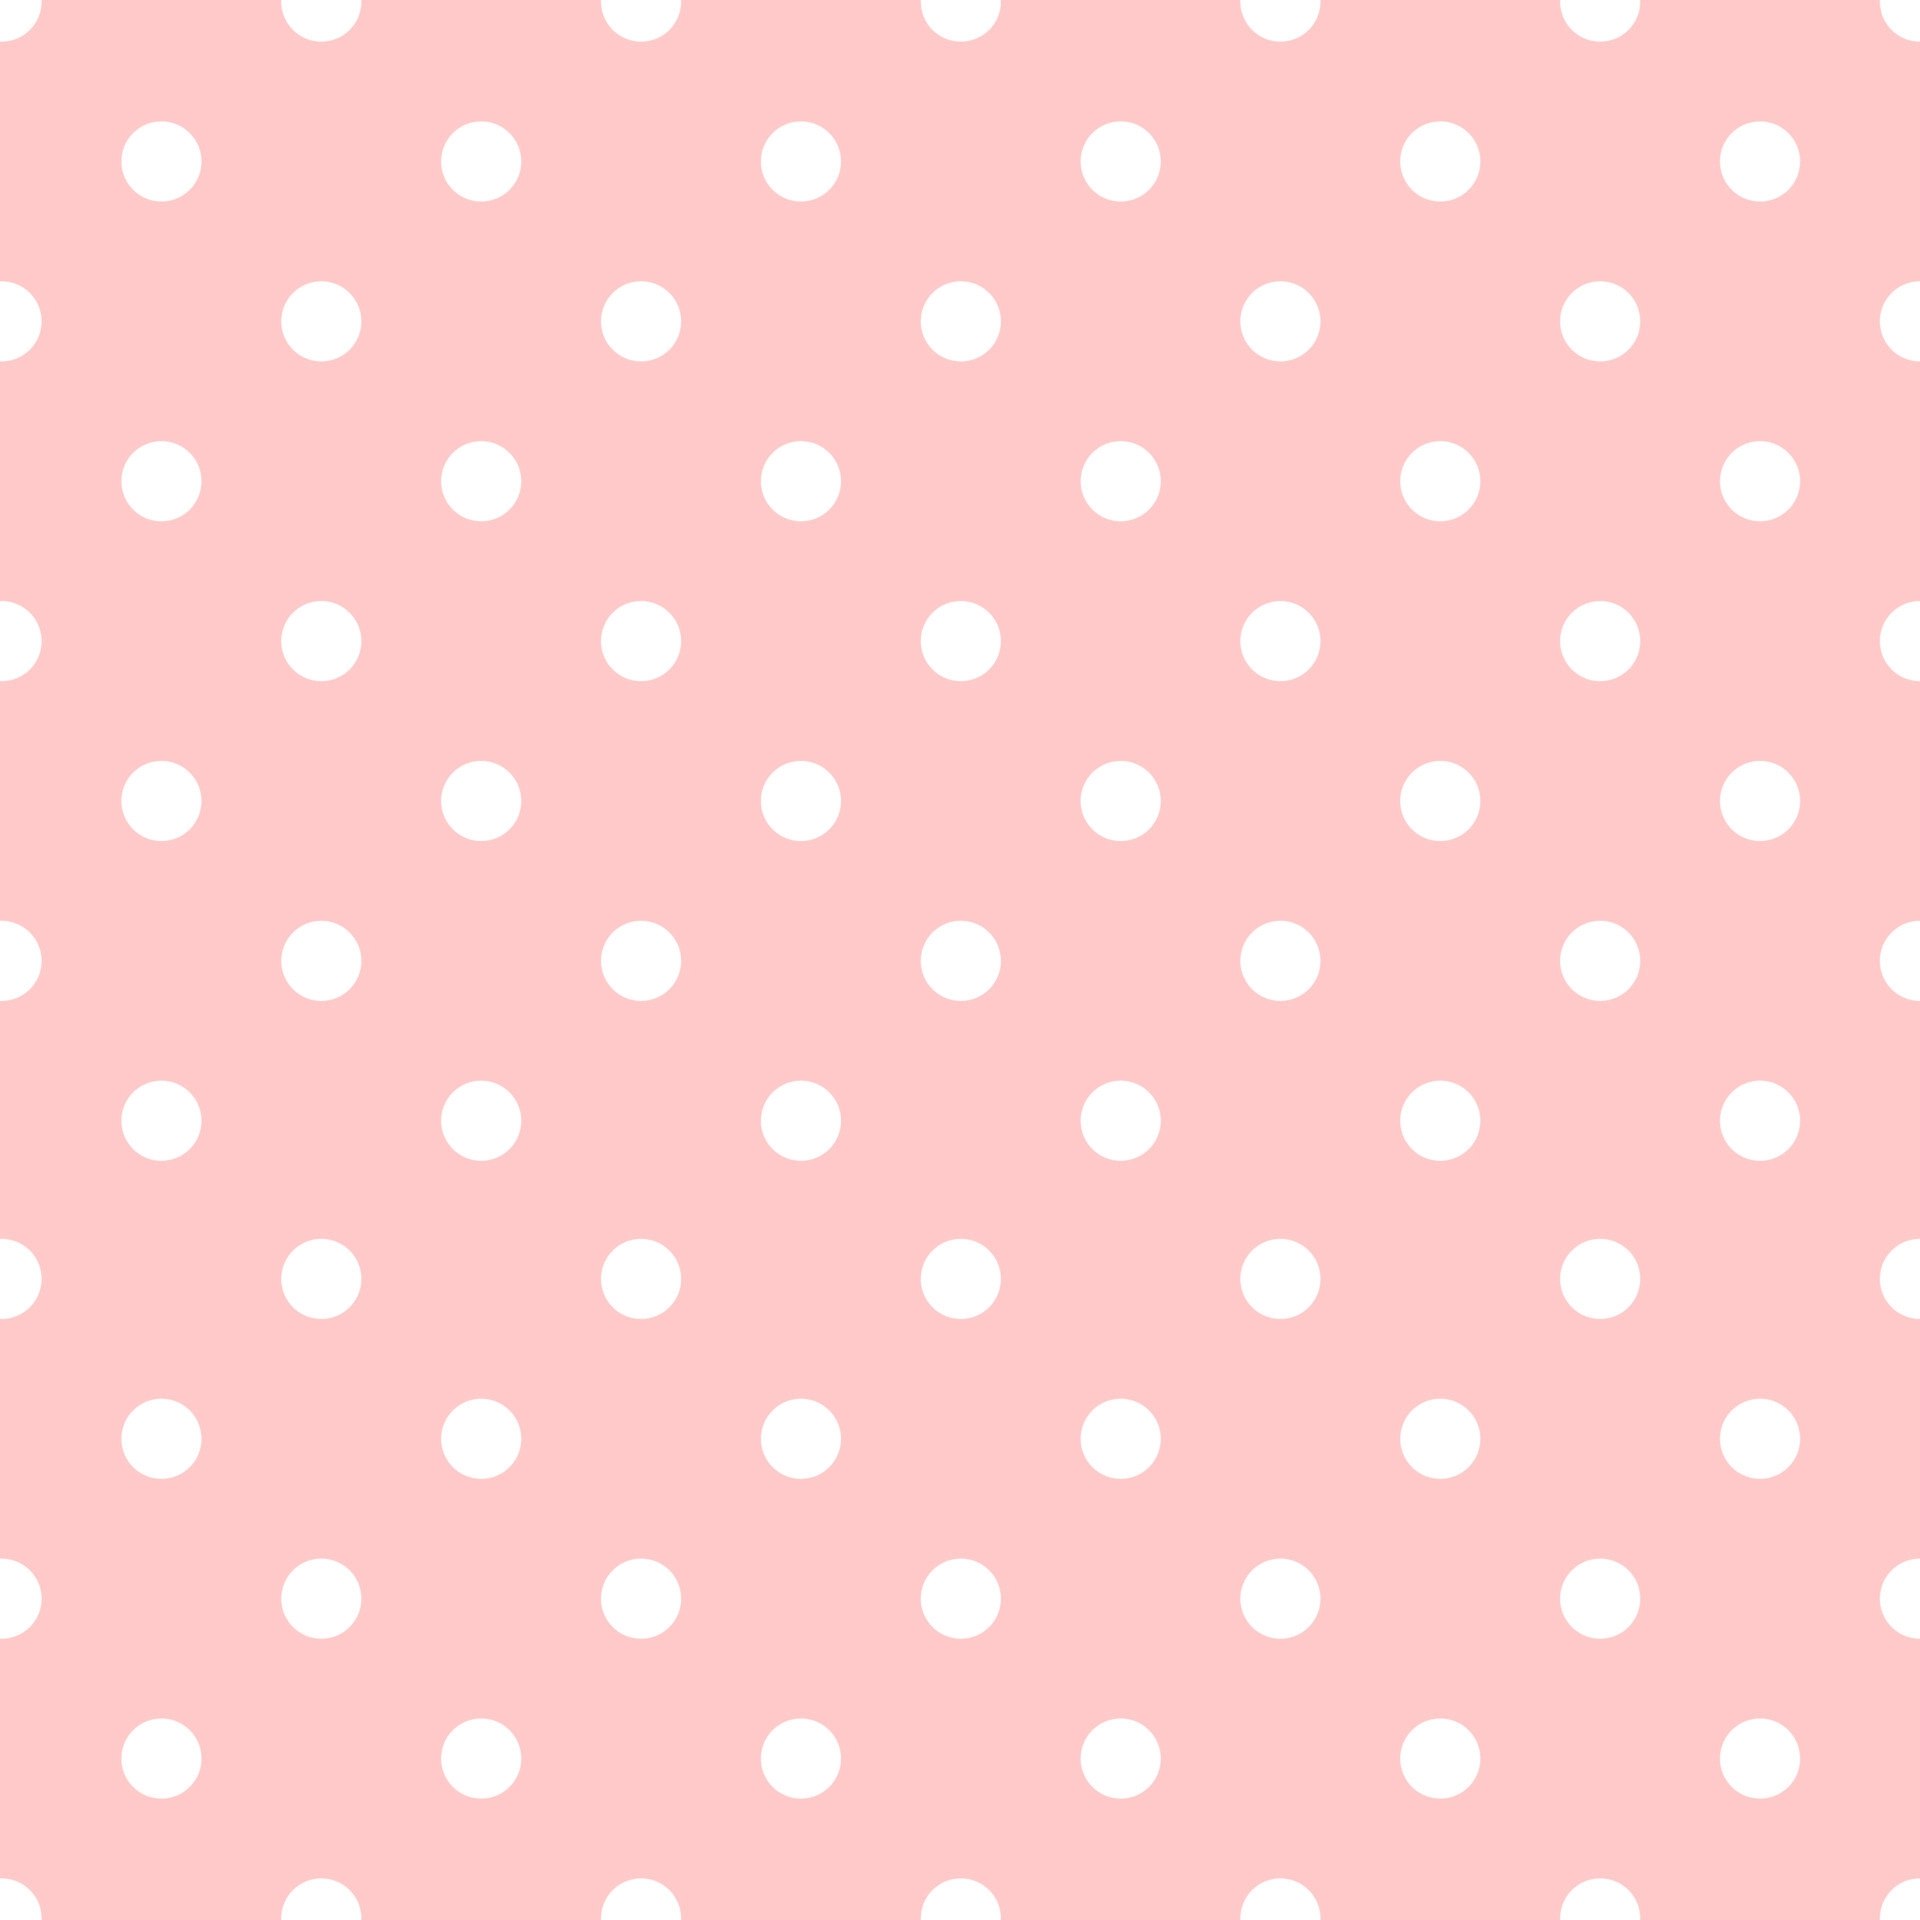 1920x1920 Seamless background with pastel polka dots 5467289 Vector Art